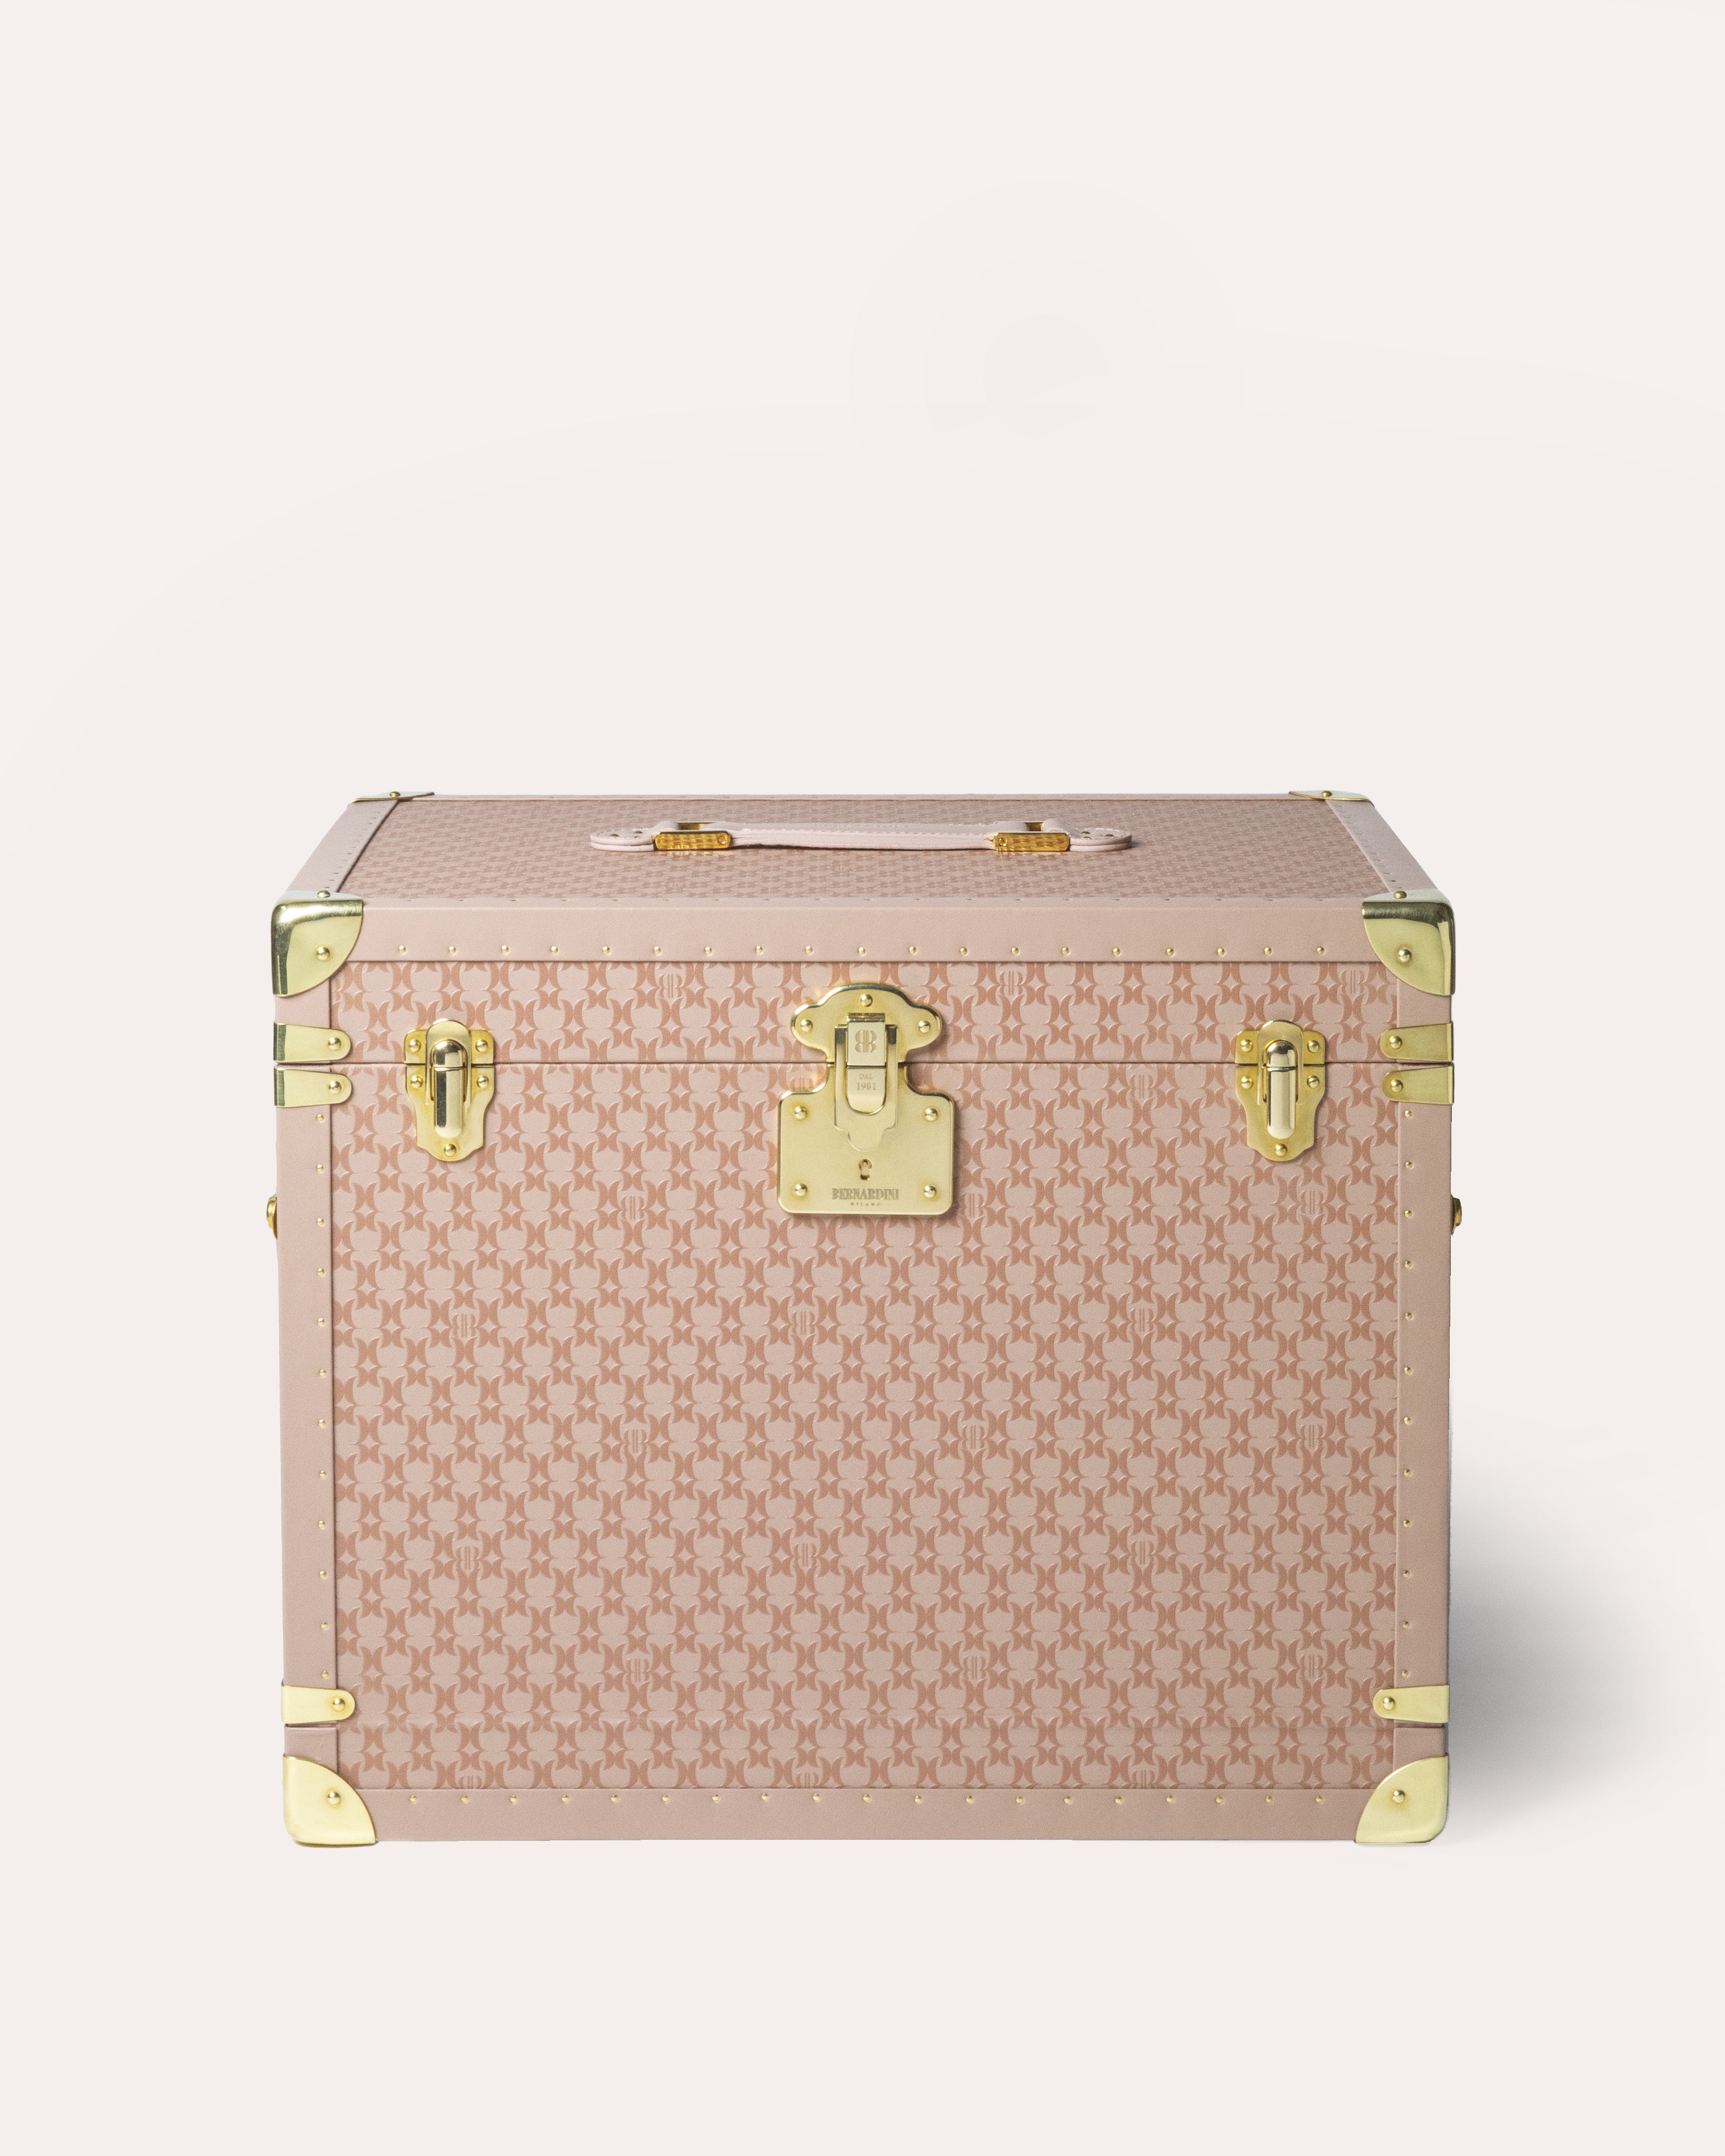 Bernardini Milano Champagne trunk - pink leather and alcantara - with 6 flutes and ice bucket